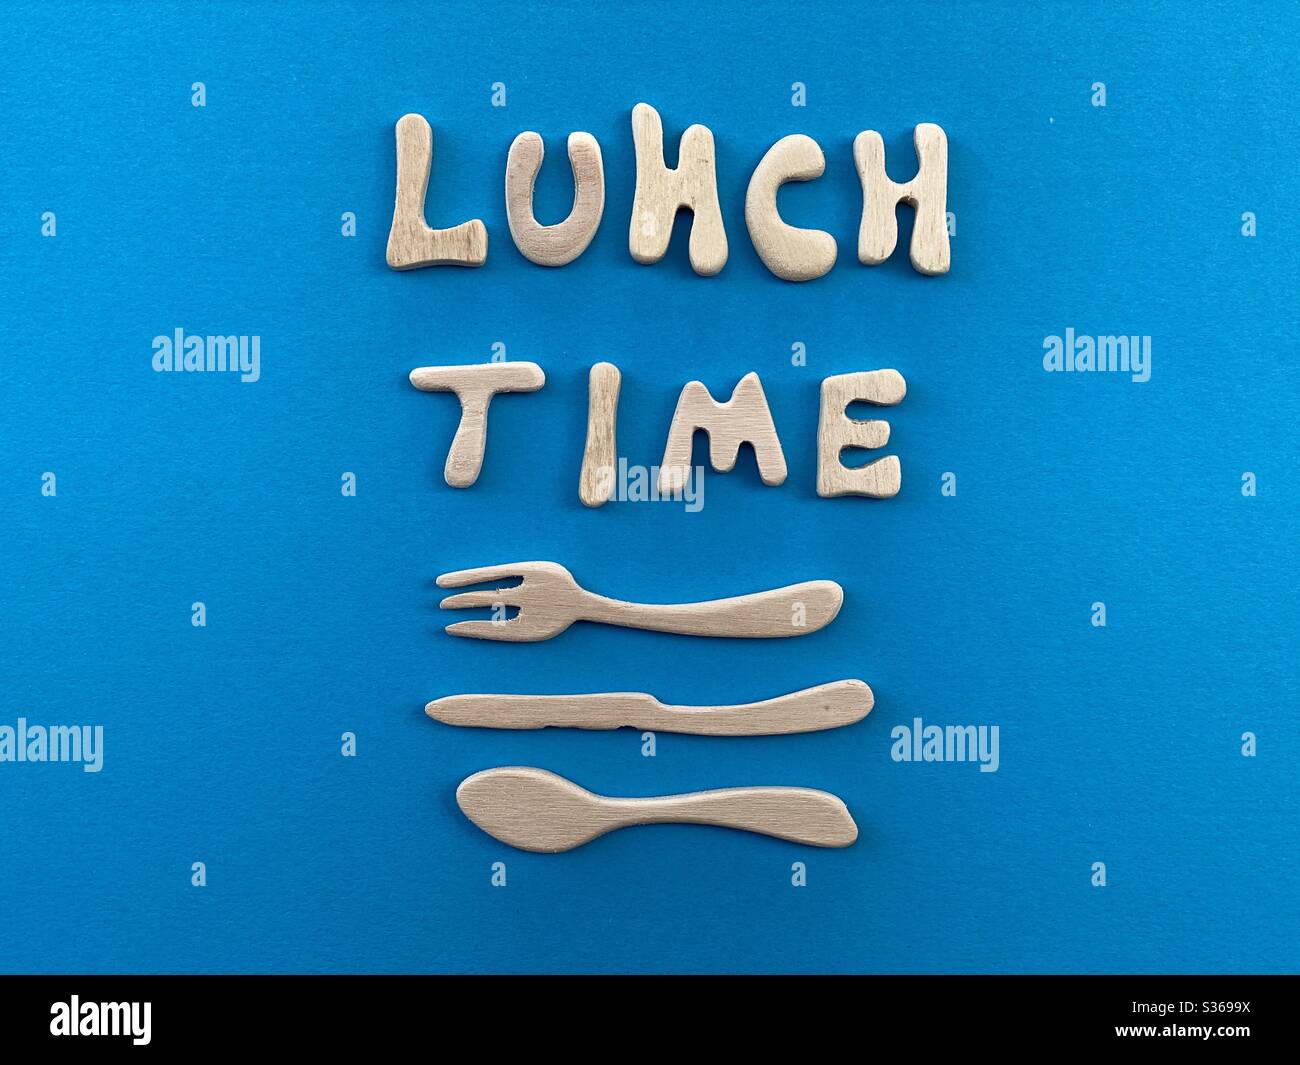 Lunch time text composed with wooden artistic letters with wooden fork, knife and spoon design over blue background Stock Photo